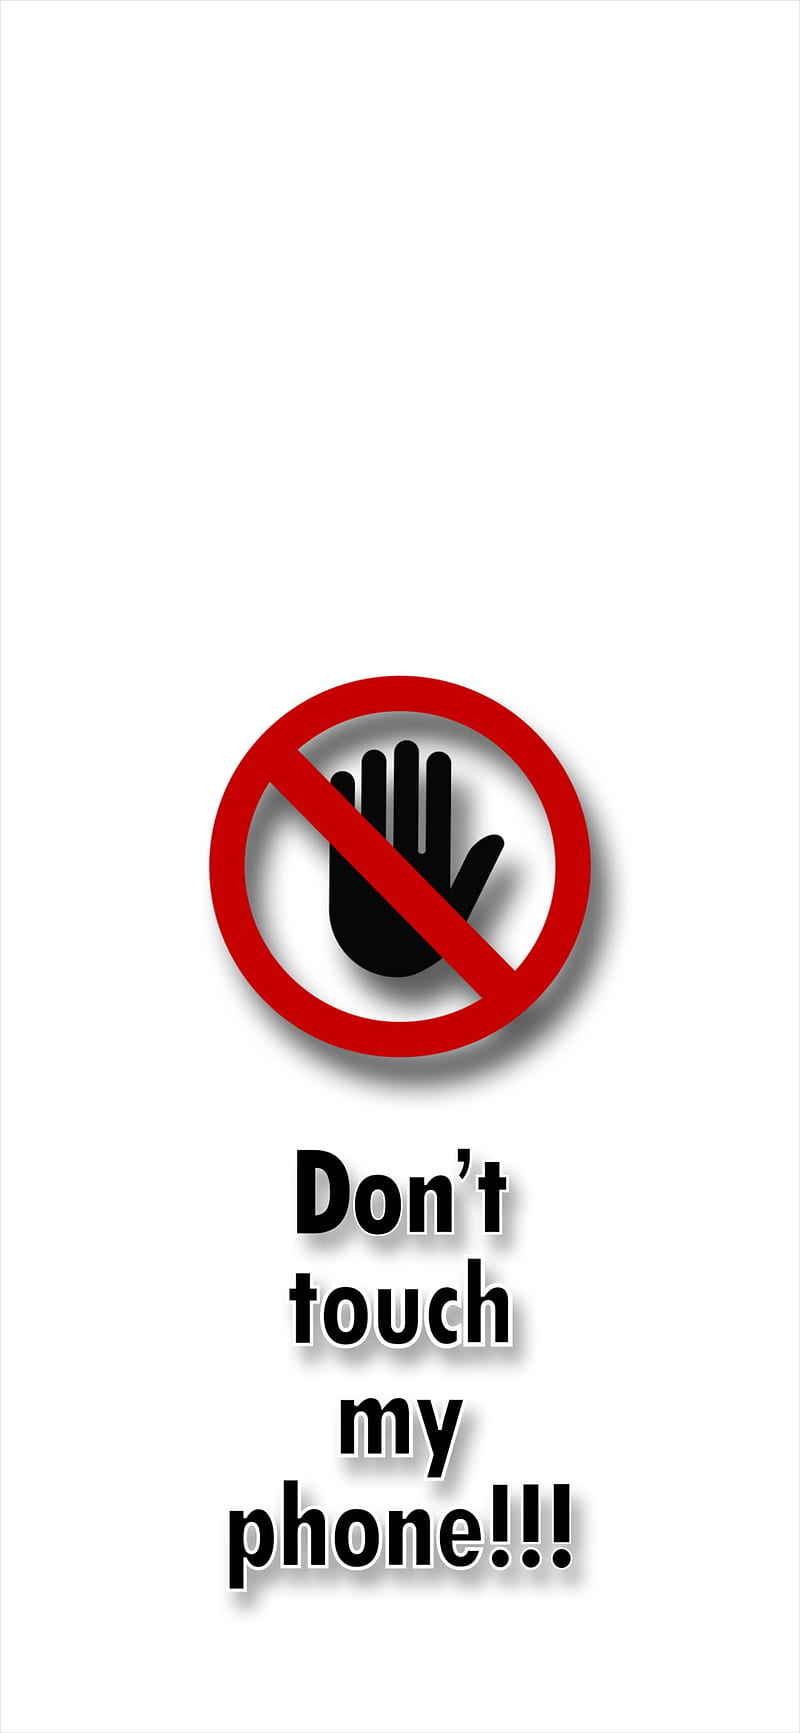 Don't touch my phone, don't touch, dont, hand, red, sign, stop, text, warning, wordart, HD phone wallpaper